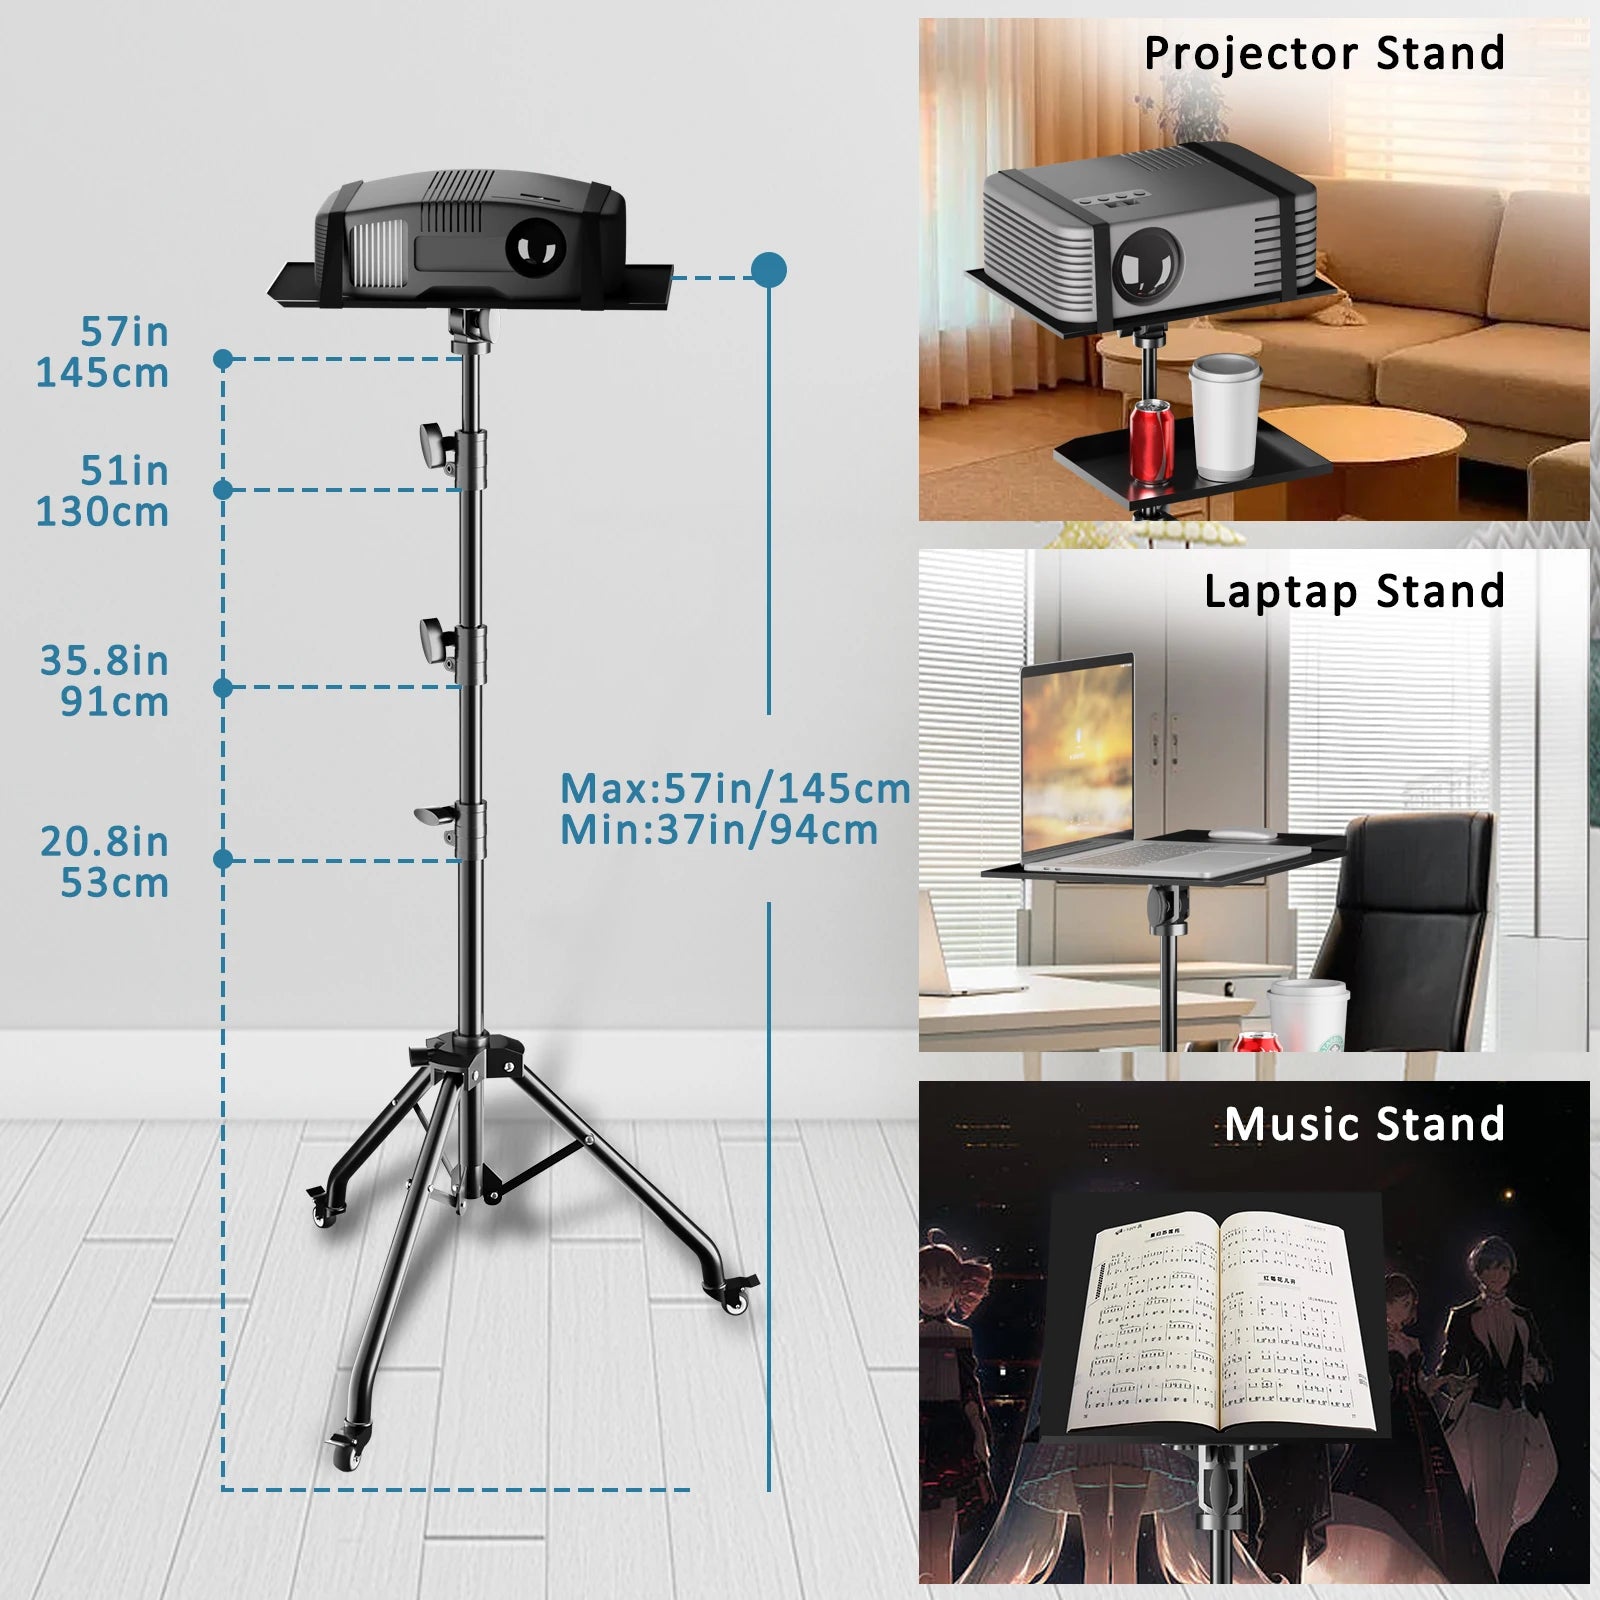 Projector Tripod Stand, Adjustable Height, Portable with Wheels